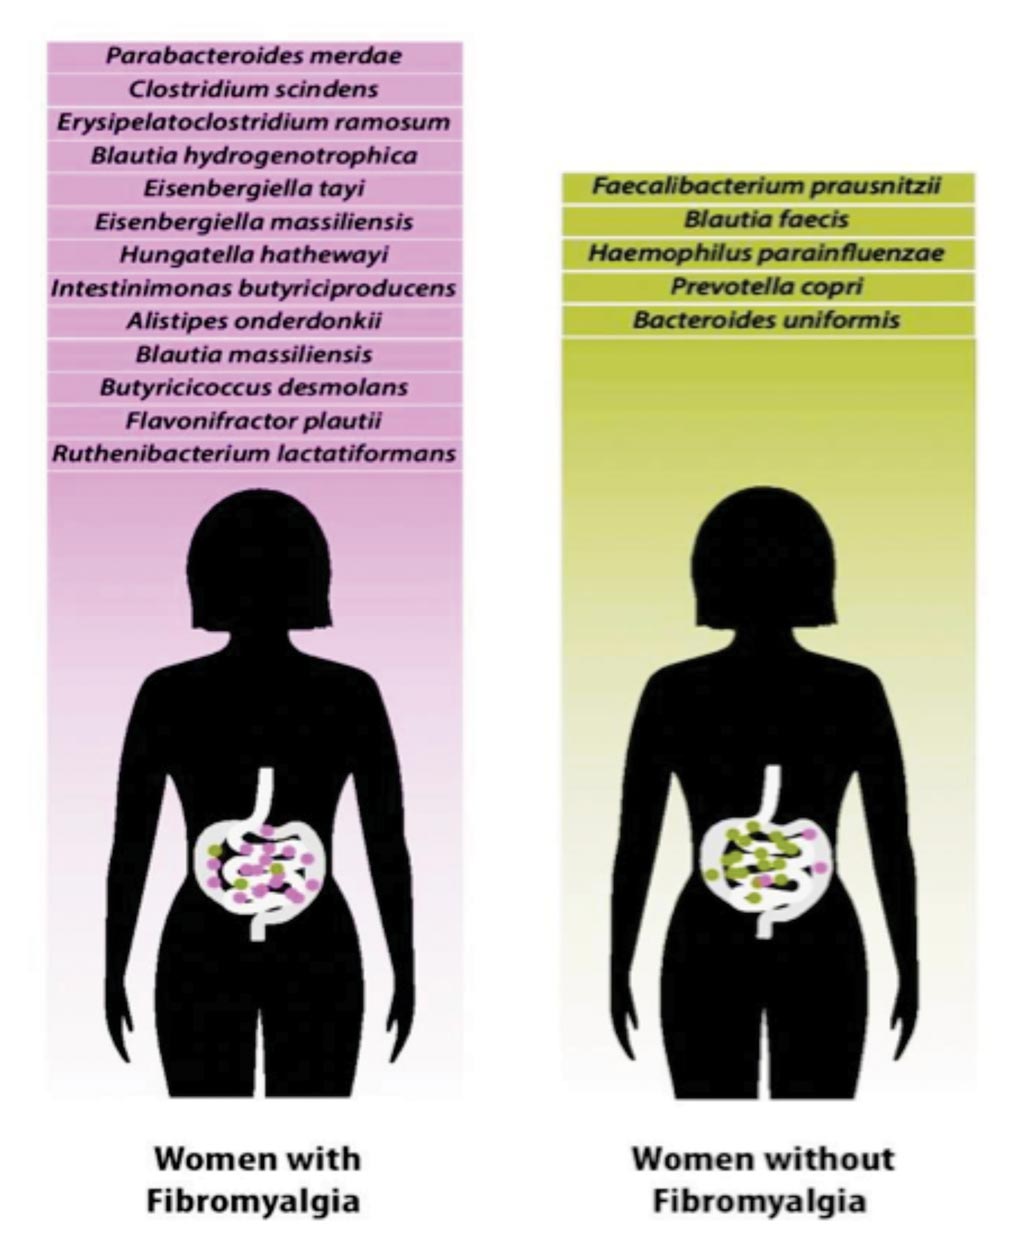 Image: Research shows fibromyalgia patients may have a distinct composition of gut microbiome species (Photo courtesy of Christopher Bergland).